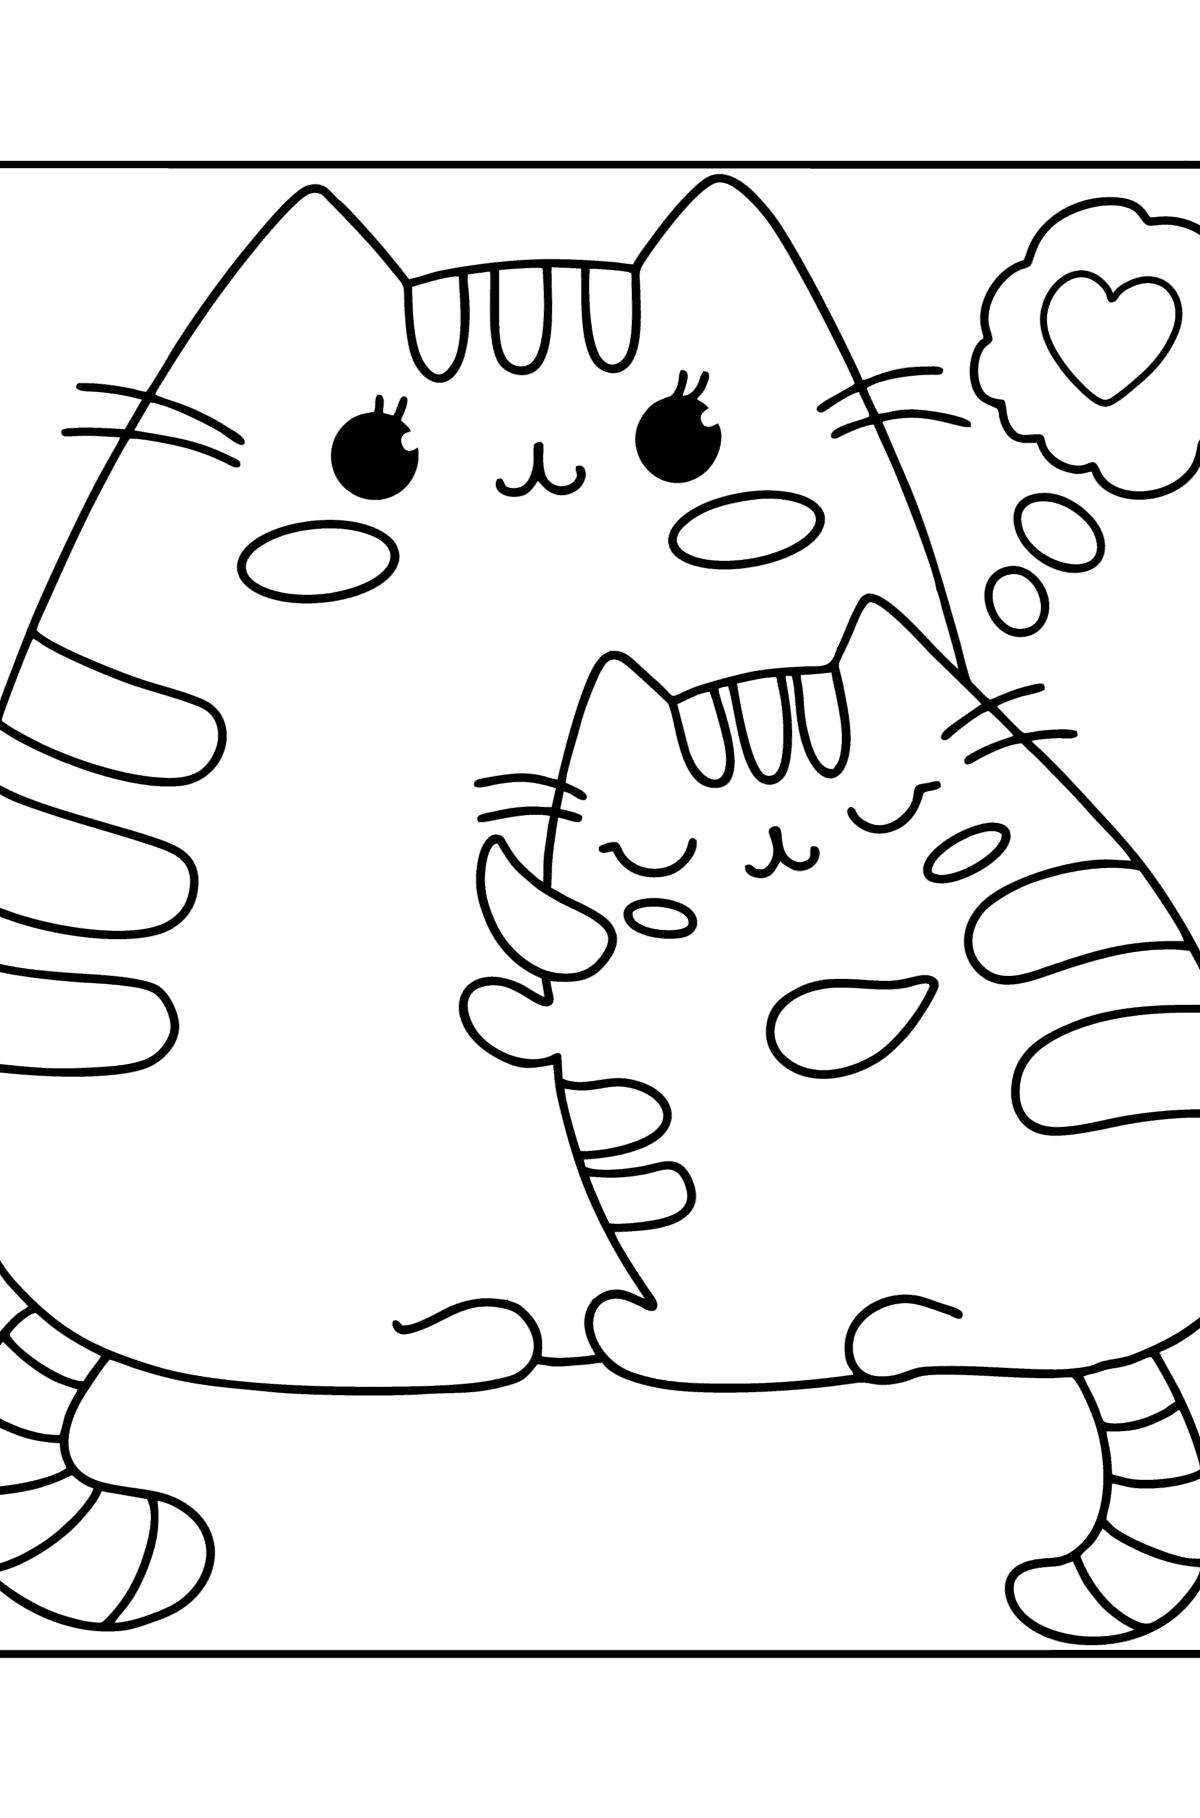 Pusheen and mom сoloring page - Coloring Pages for Kids